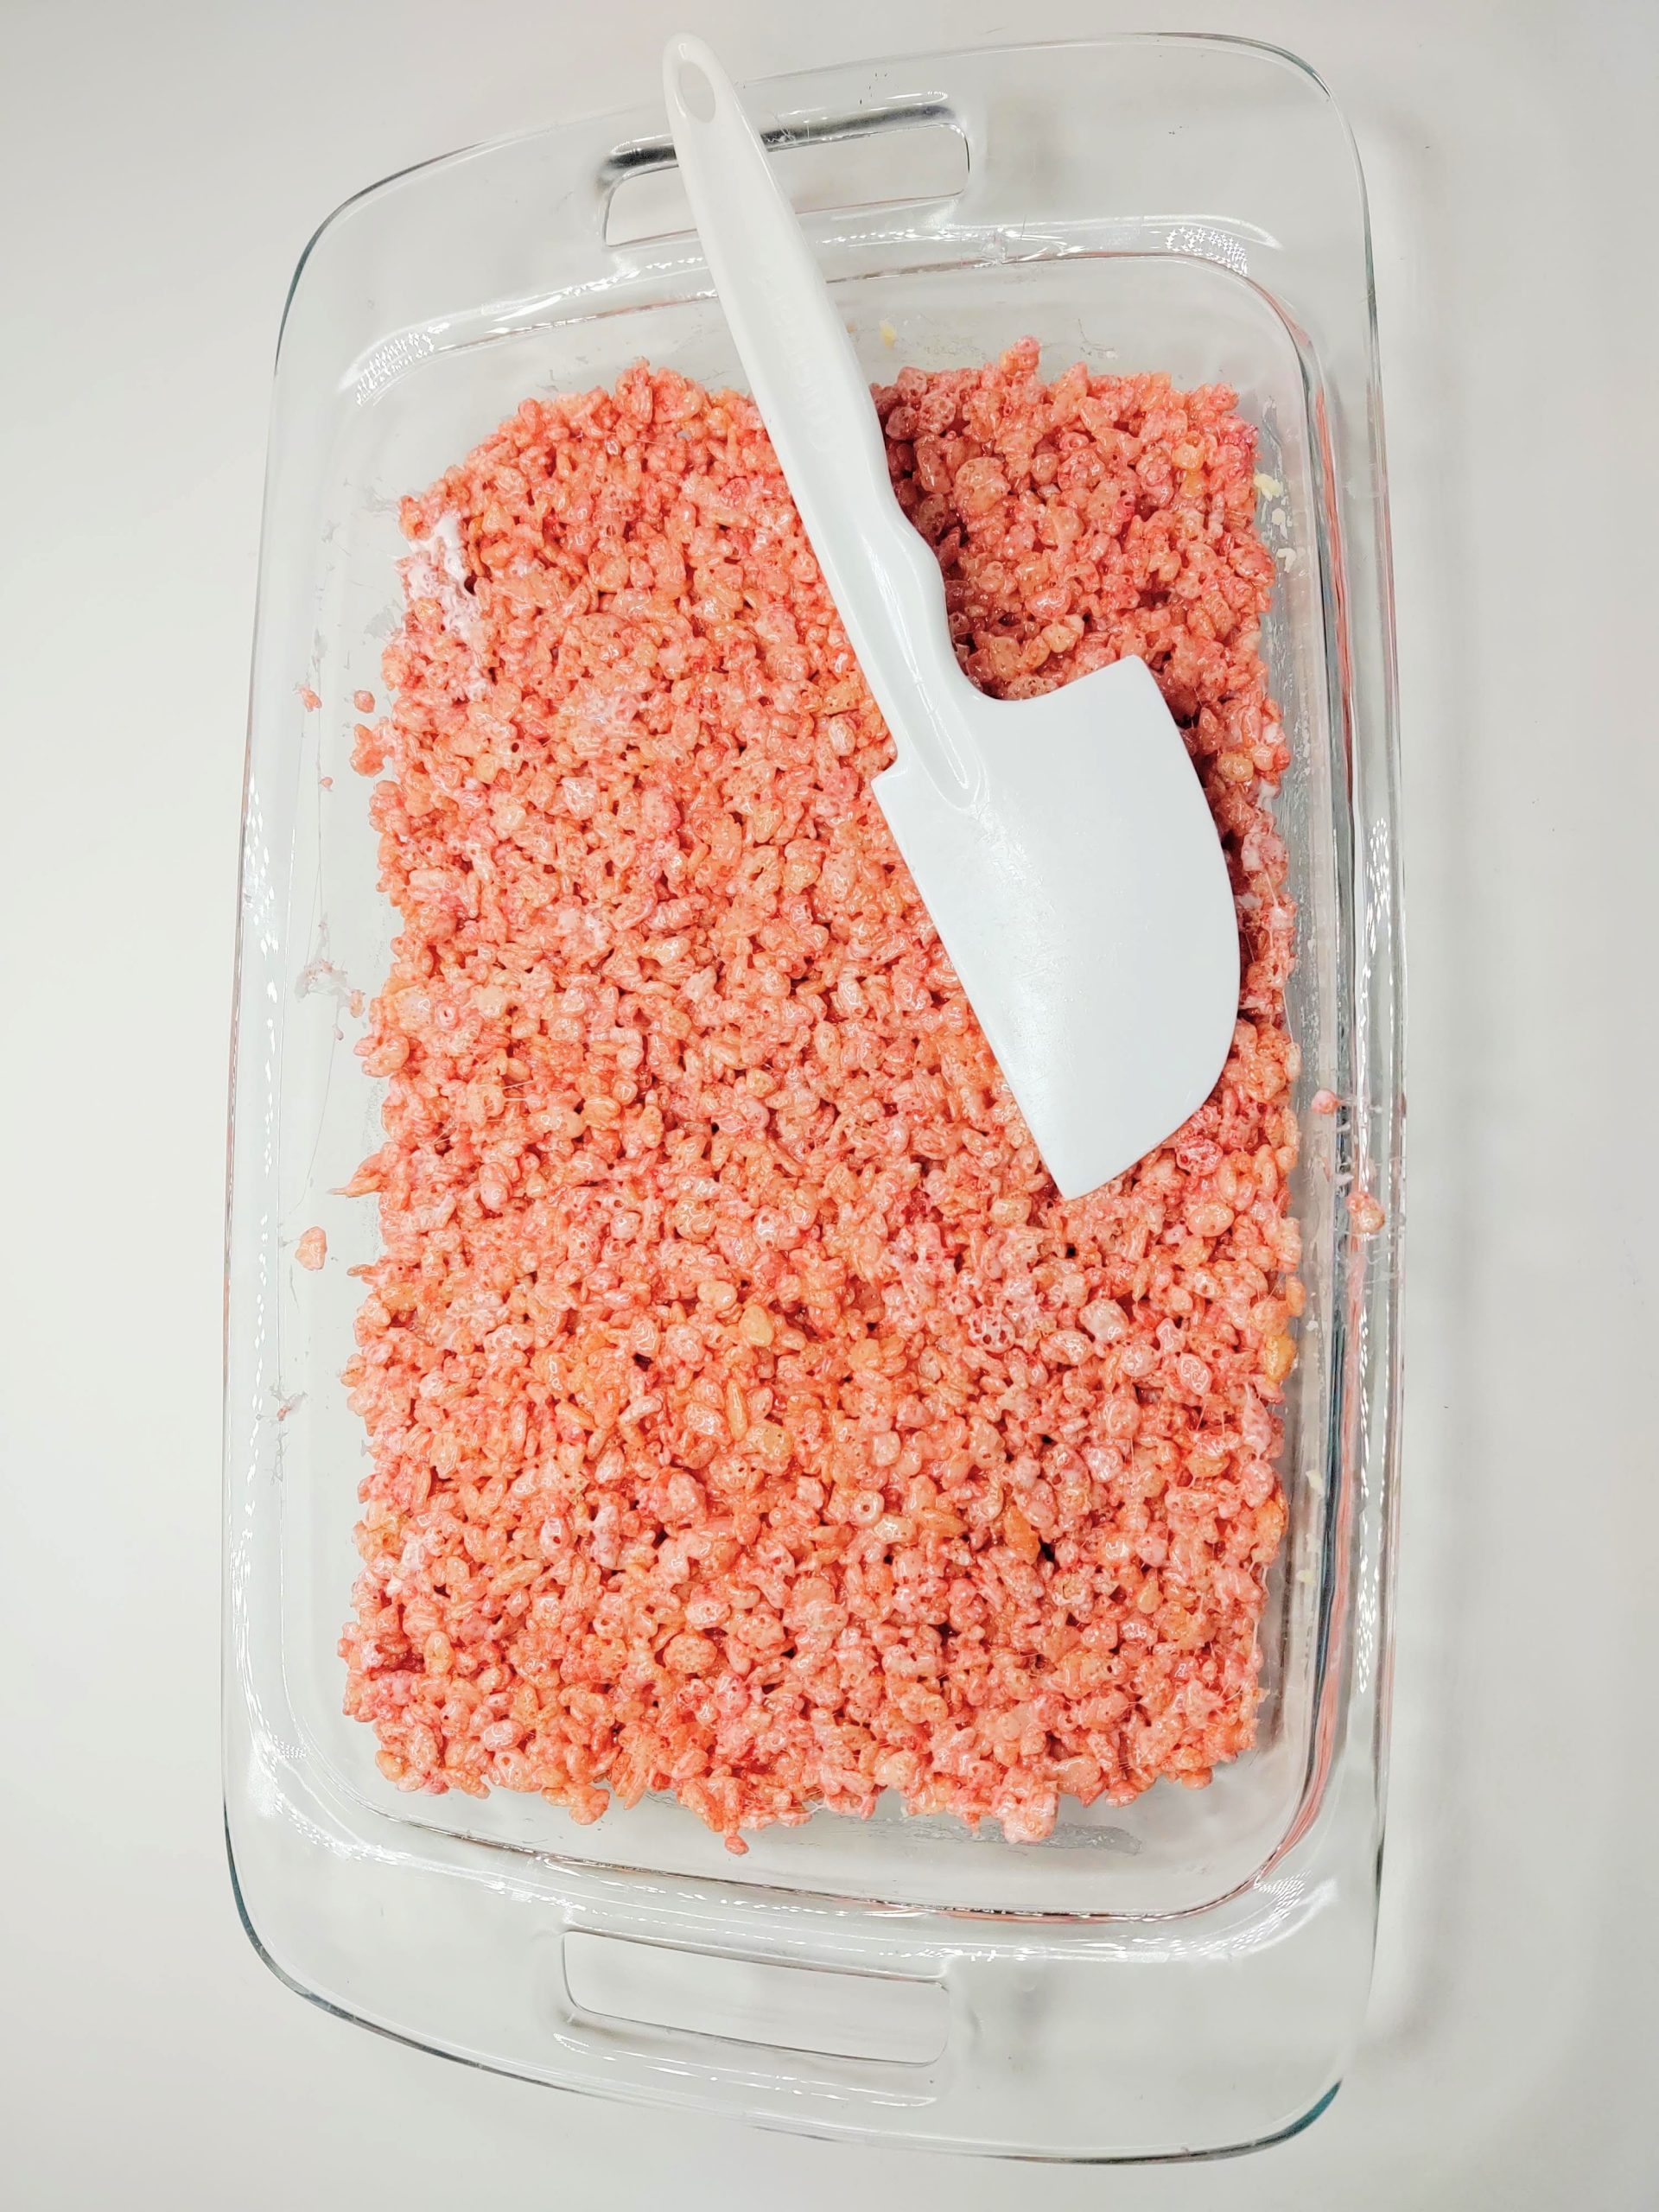 marshmallow and cereal mixture pressed into glass pan with spatula on top